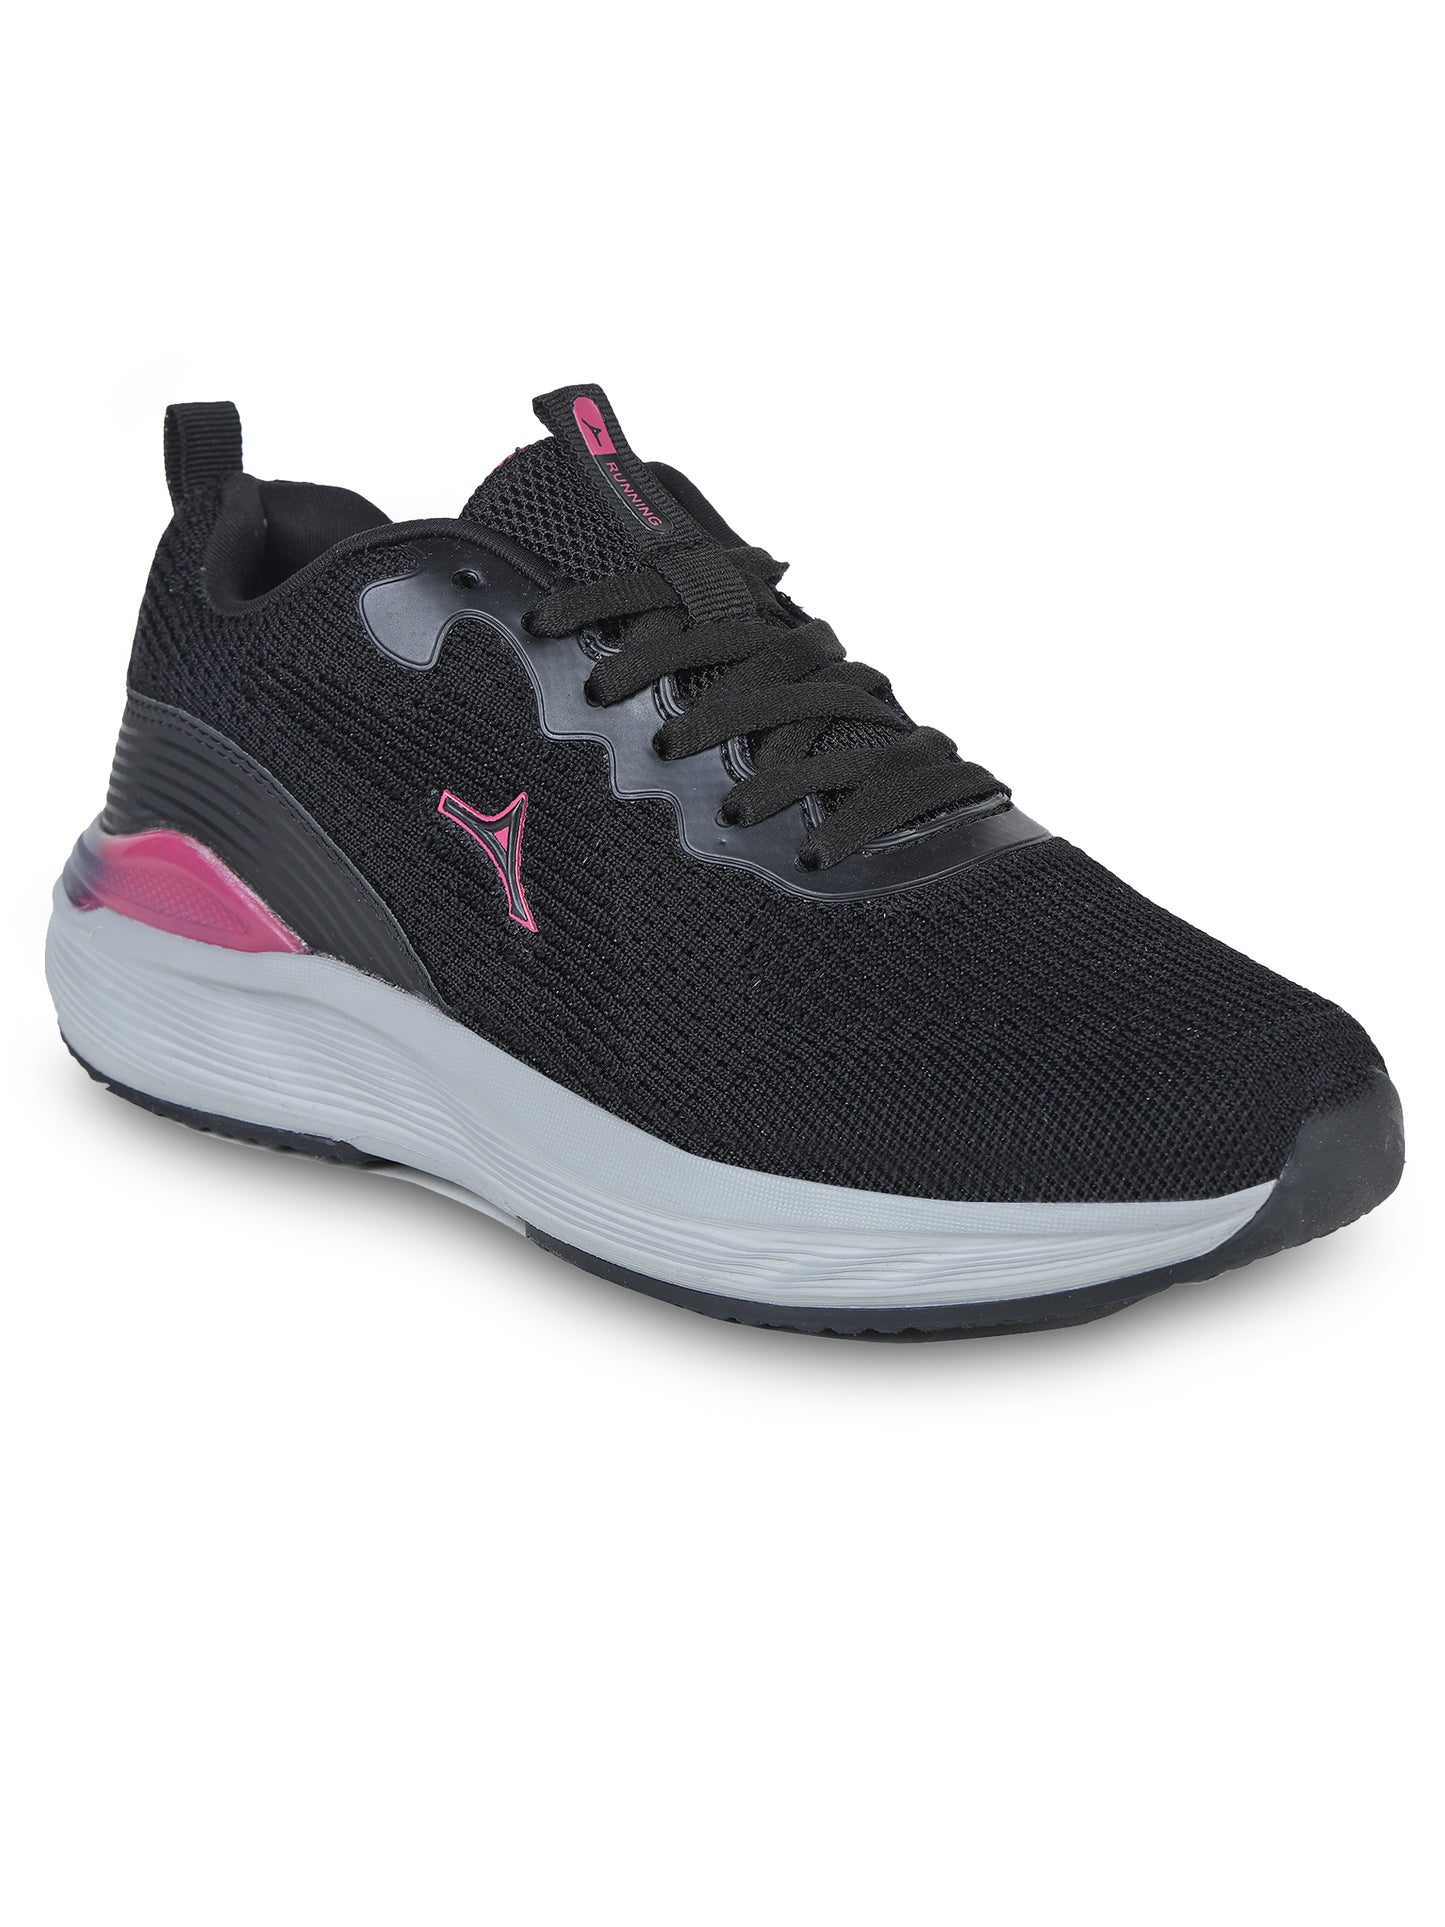 ABROS GRACE SPORTS SHOES FOR WOMEN